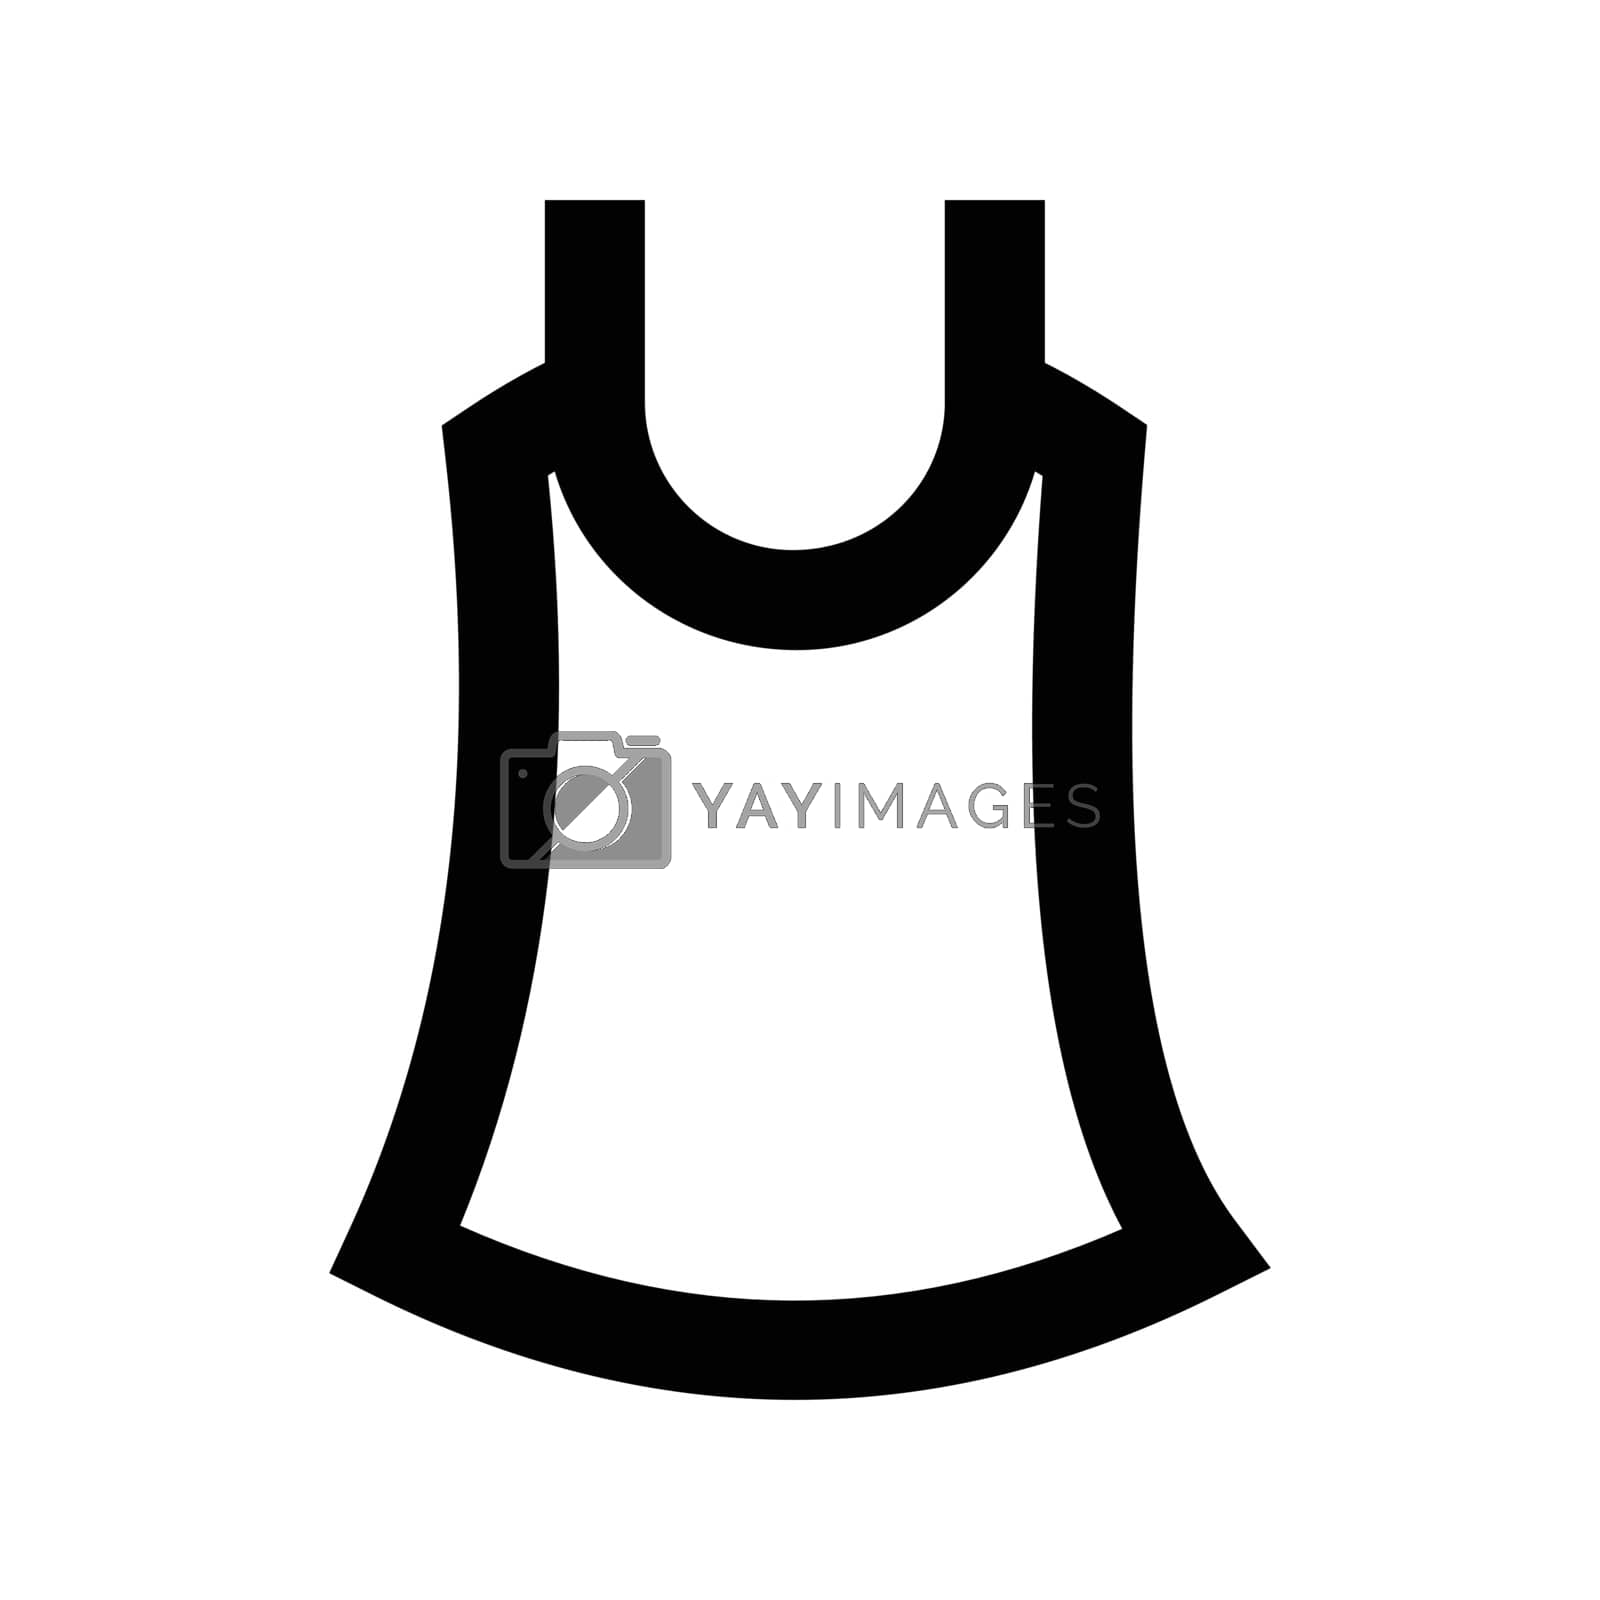 Royalty free image of garment by vectorstall